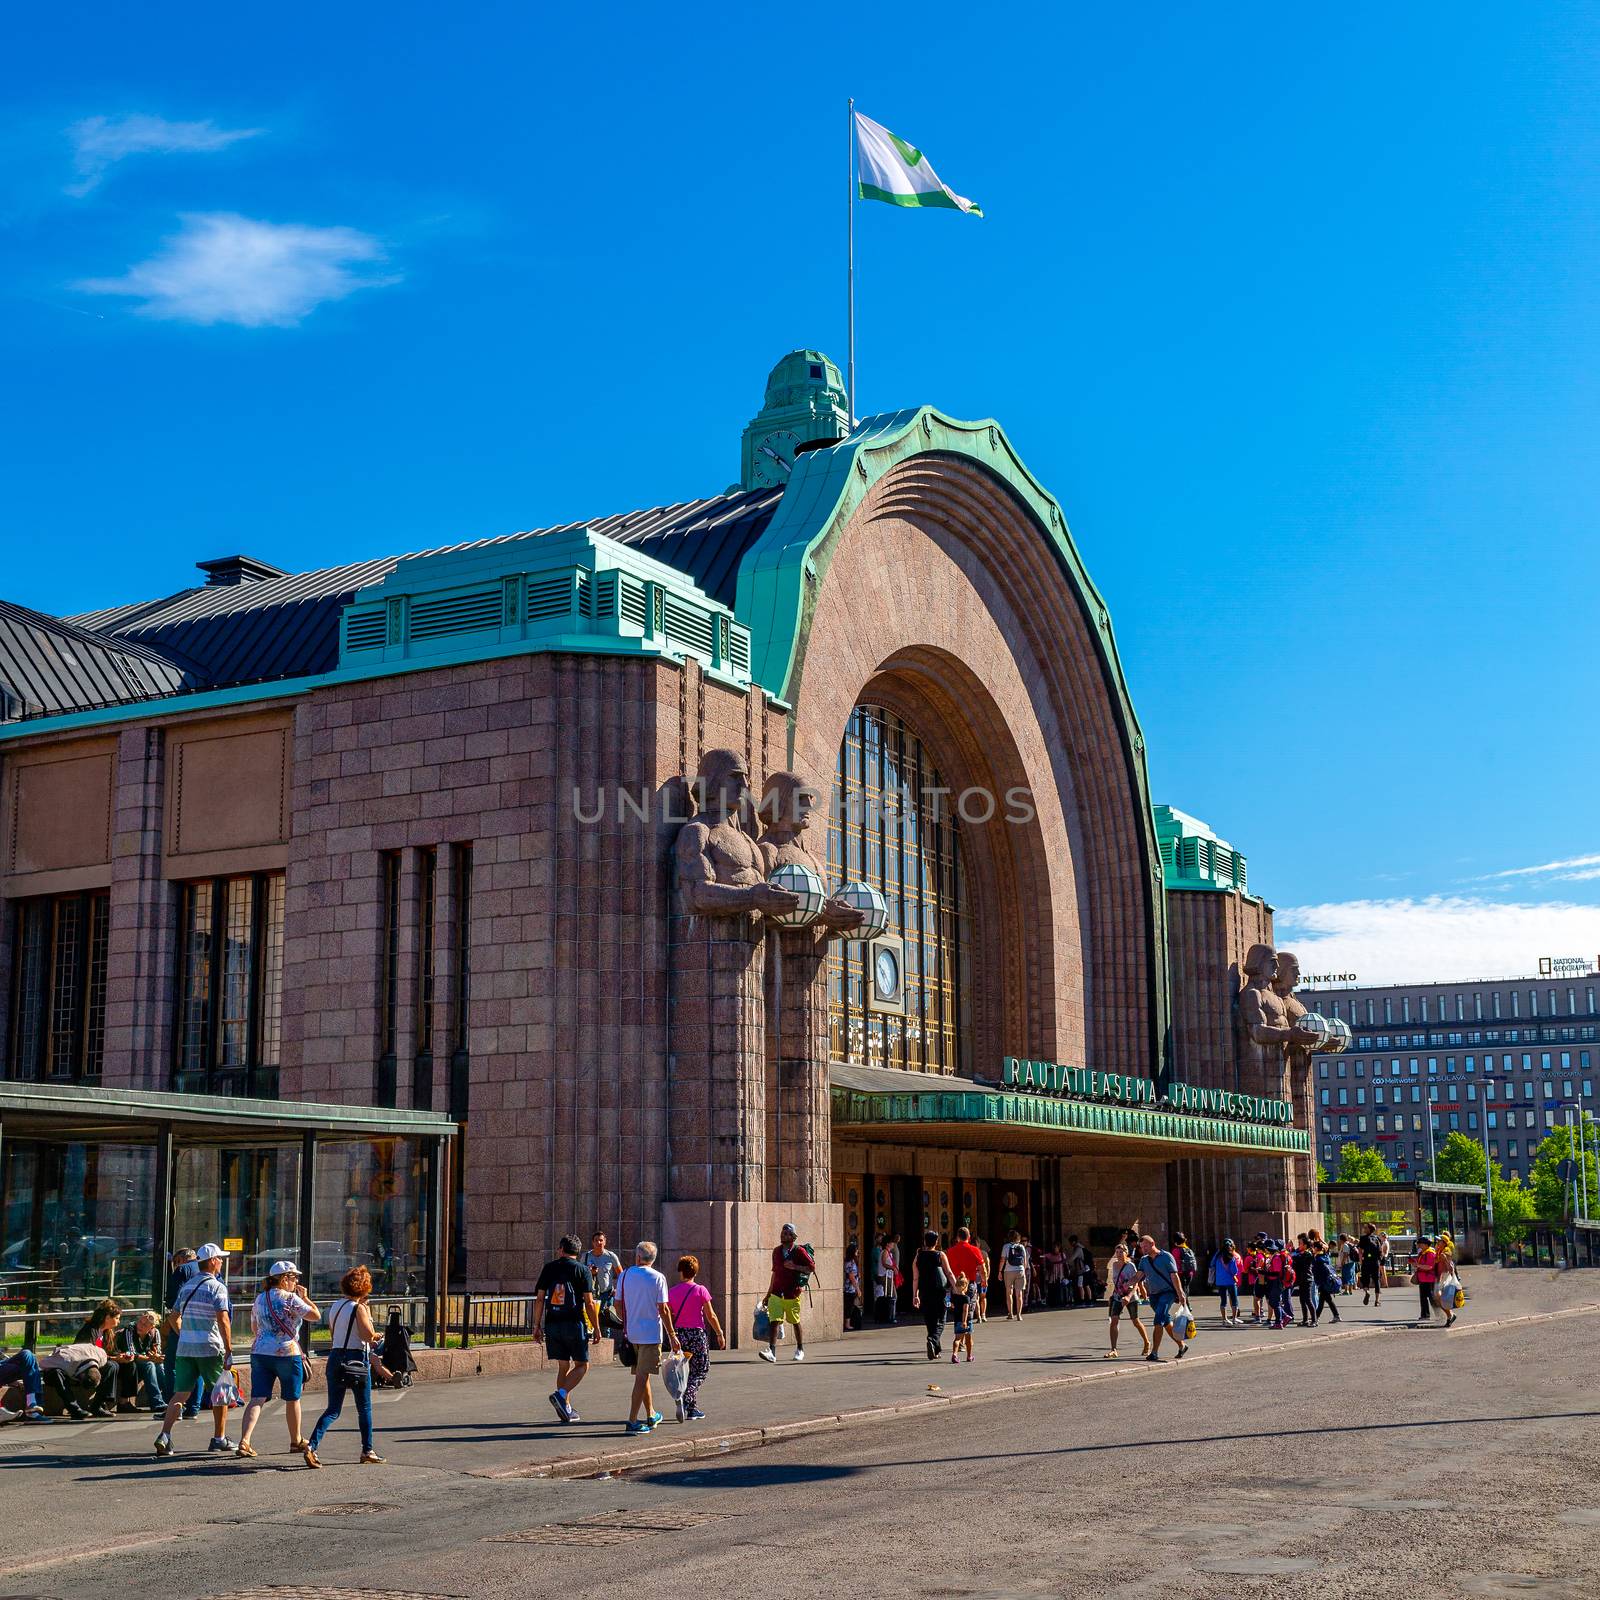 Helsinki Central Station is the main station for commuter rail and long-distance trains departing from HELSINKI, FINLAND - 04.08.2018